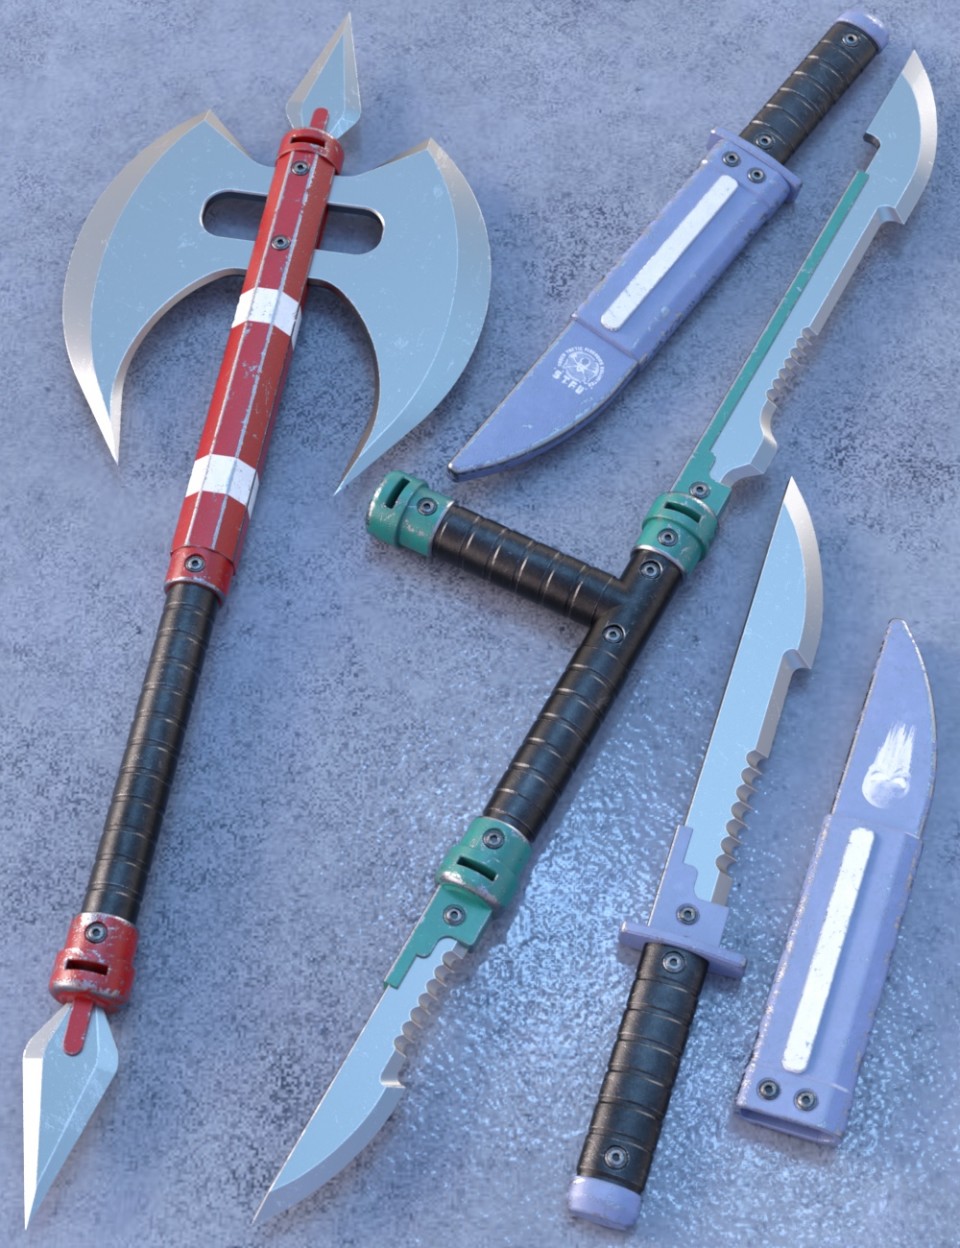 Blade Weapons 3 for Genesis 3 and 8_DAZ3DDL